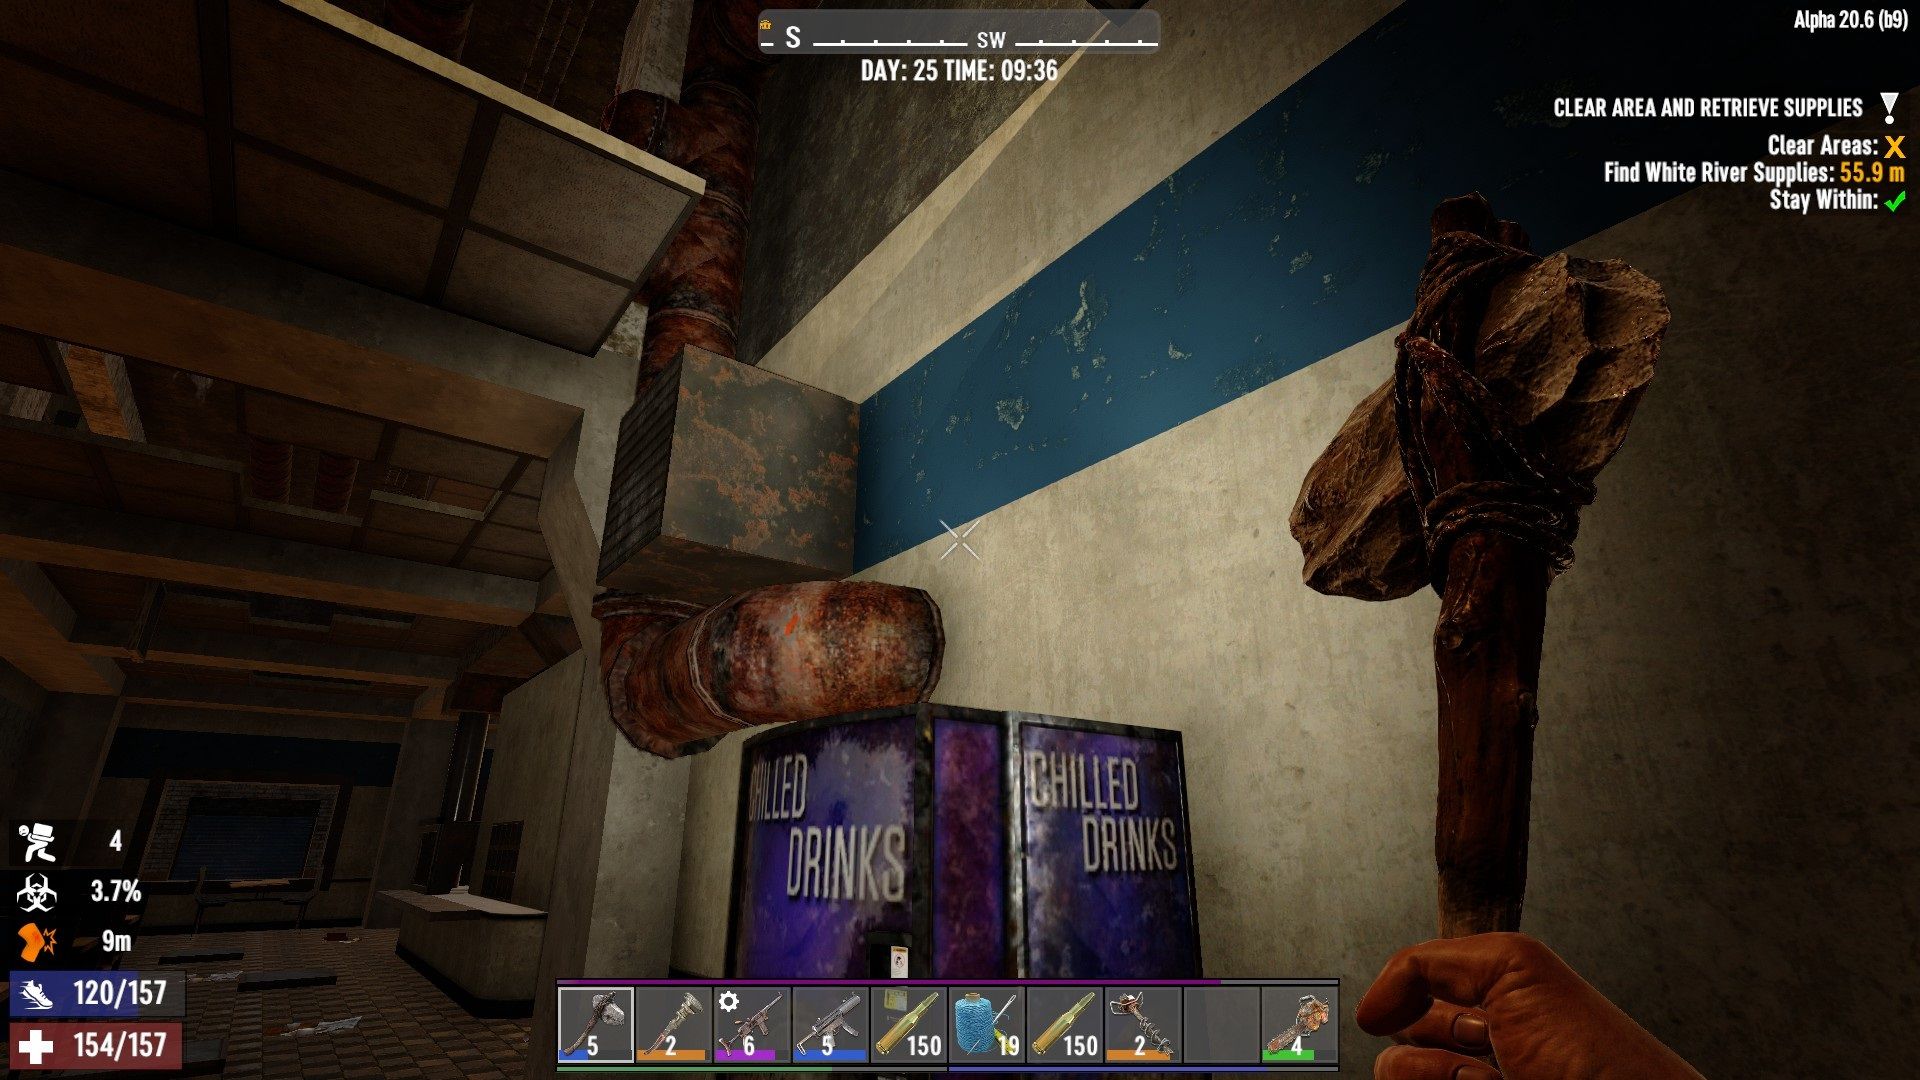 jumping up to the next floor Shamway Foods Factory 7 Days To Die.jpg